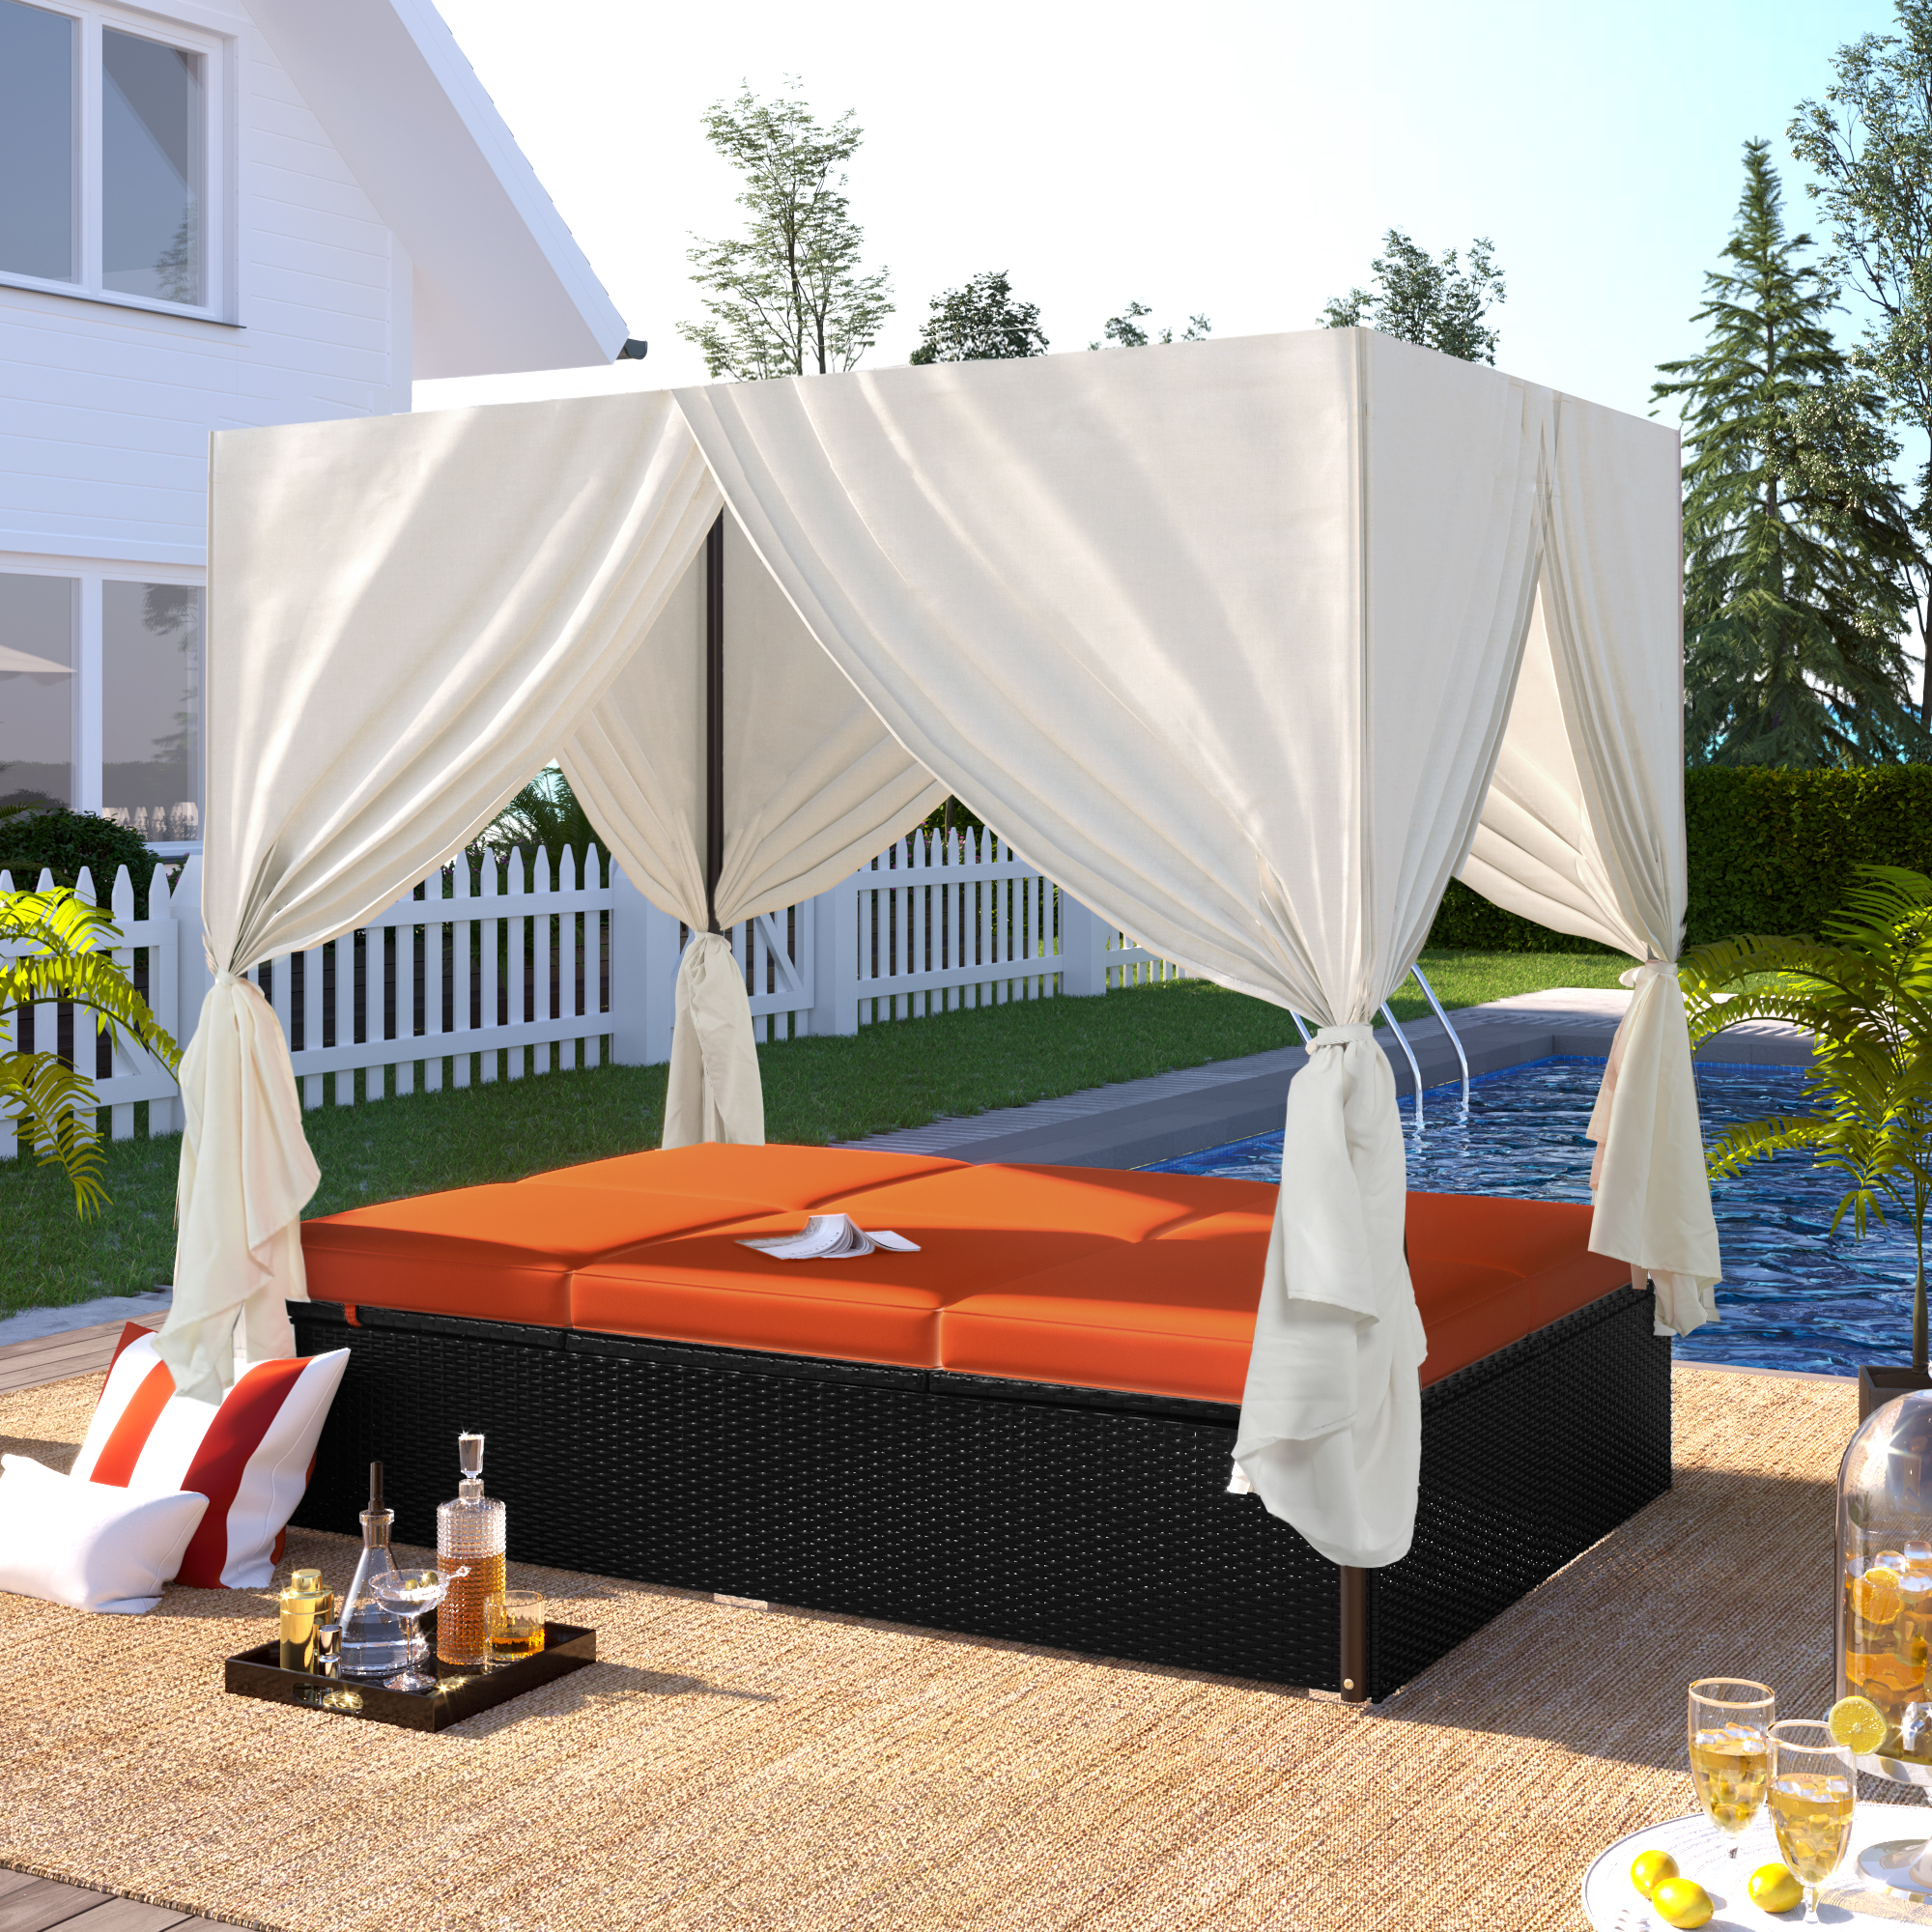 Patio Daybed, Outdoor Wicker Furniture Set with Four-Sided Canopy and Overhead Curtains, Outdoor Sofa Set w/Adjustable Seat for Patio Deck Poolside Garden Backyard - image 2 of 10